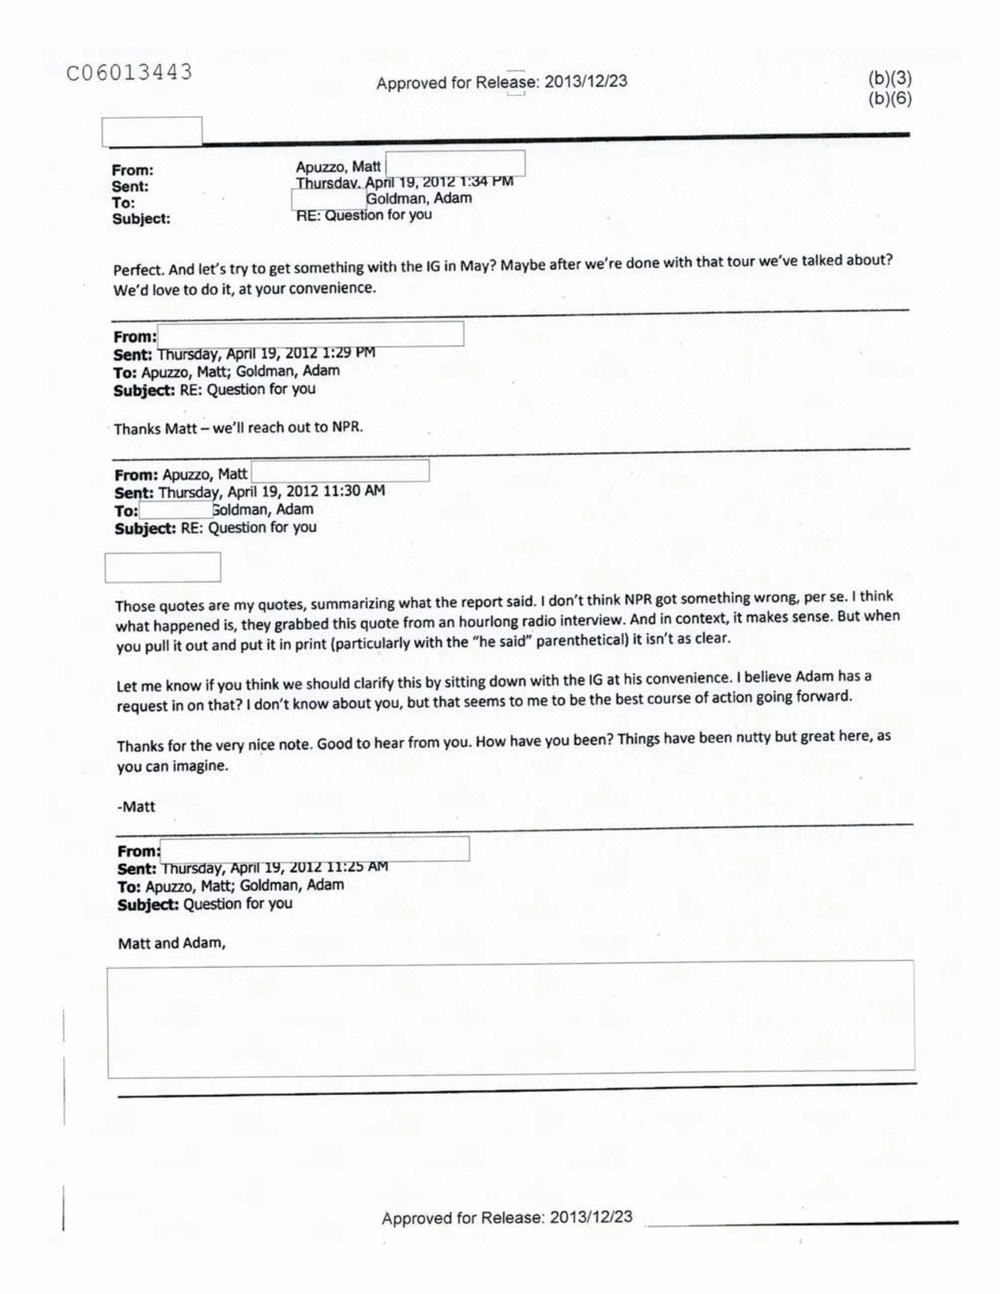 Page 307 from Email Correspondence Between Reporters and CIA Flacks